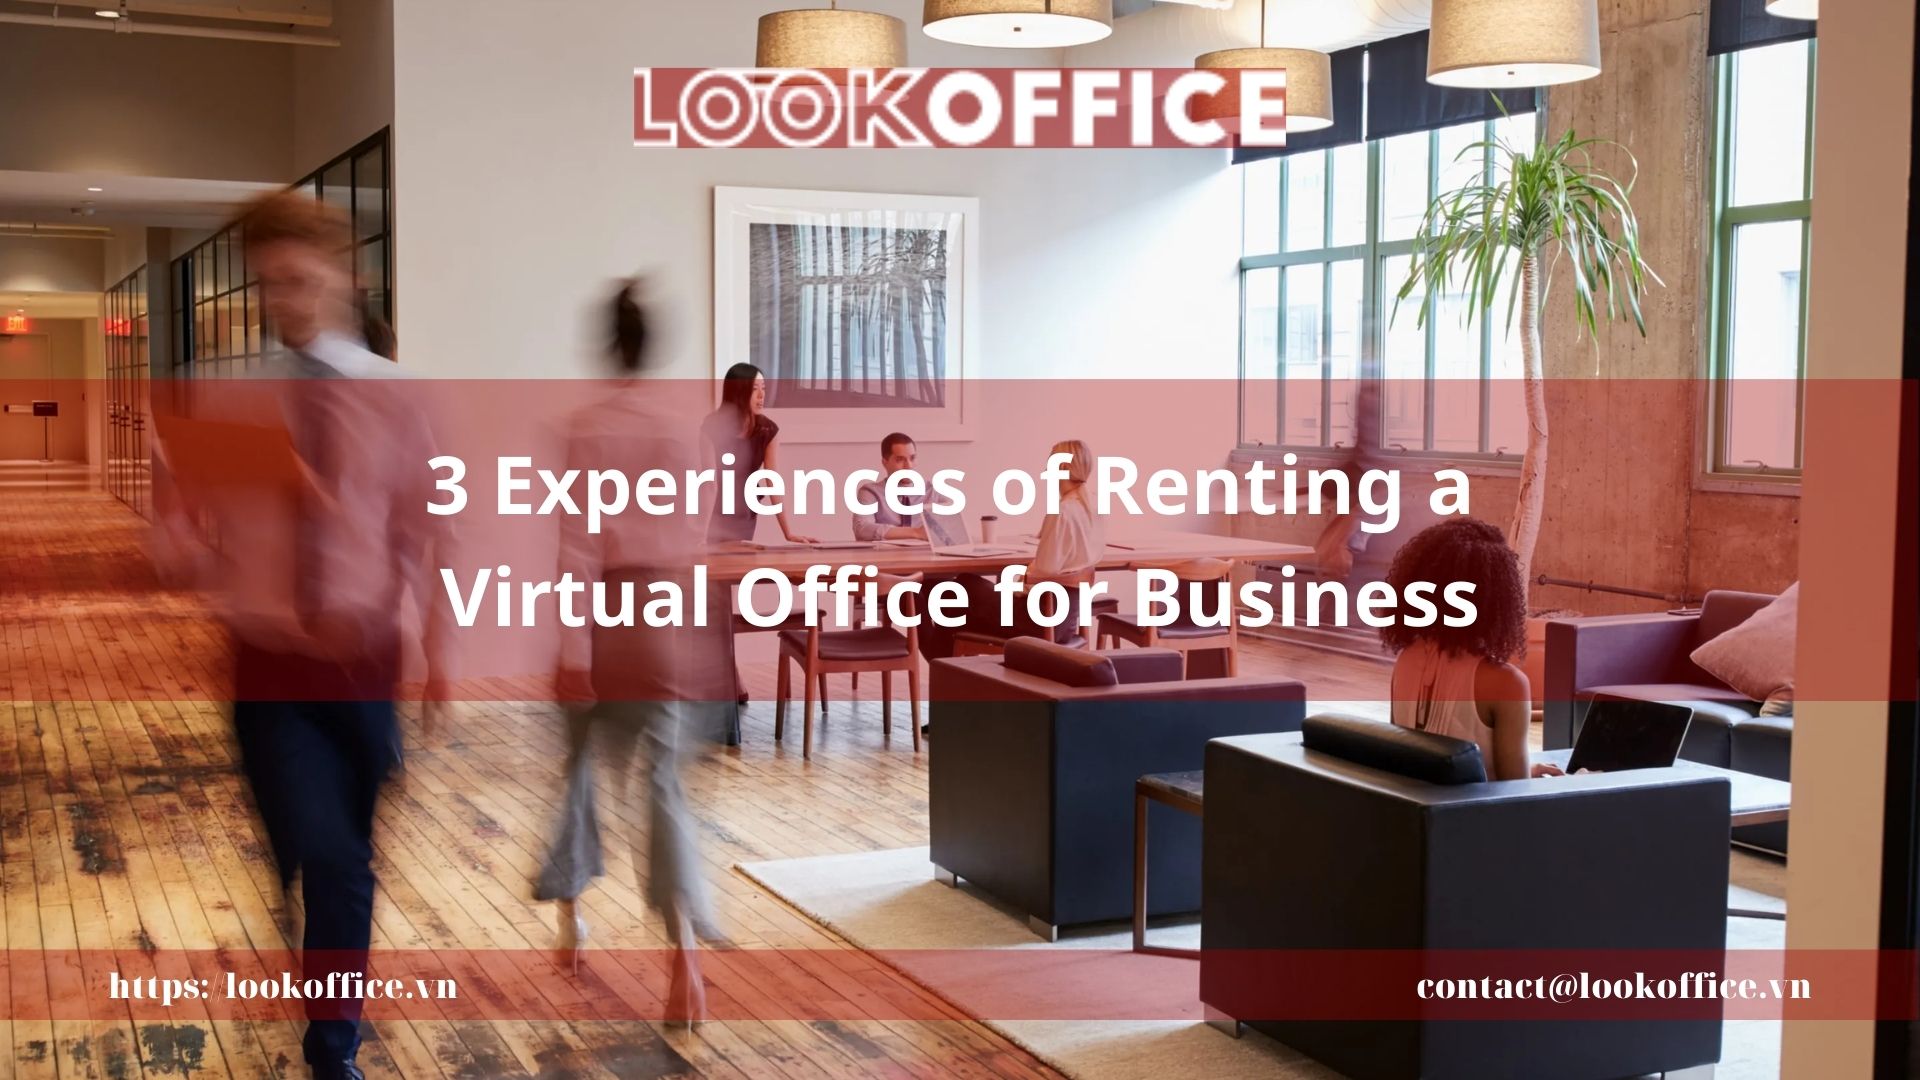 3 Experiences of Renting a Virtual Office for Business